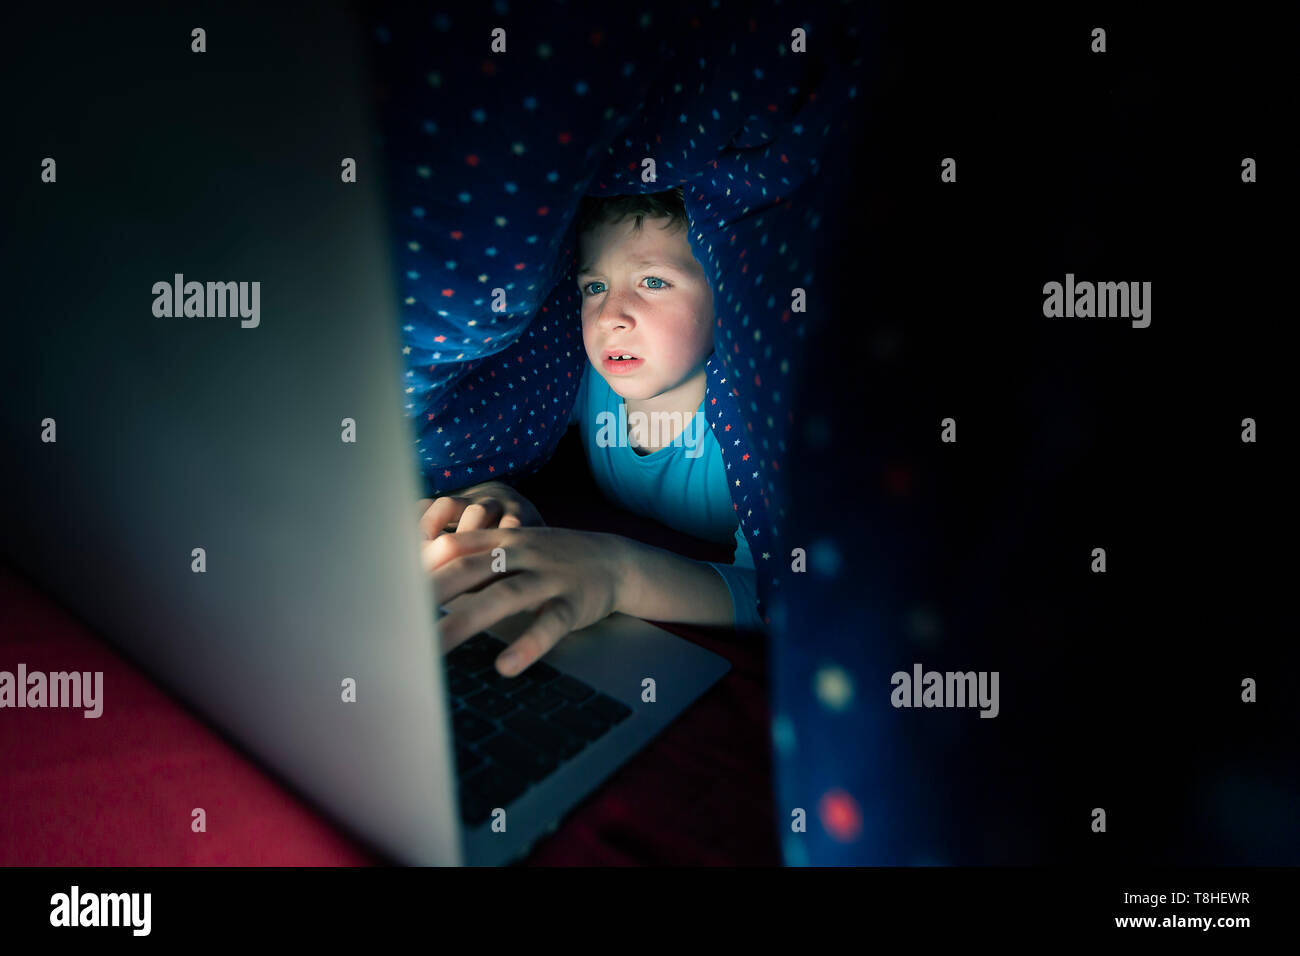 Boy secretly using the Internet in bed Stock Photo